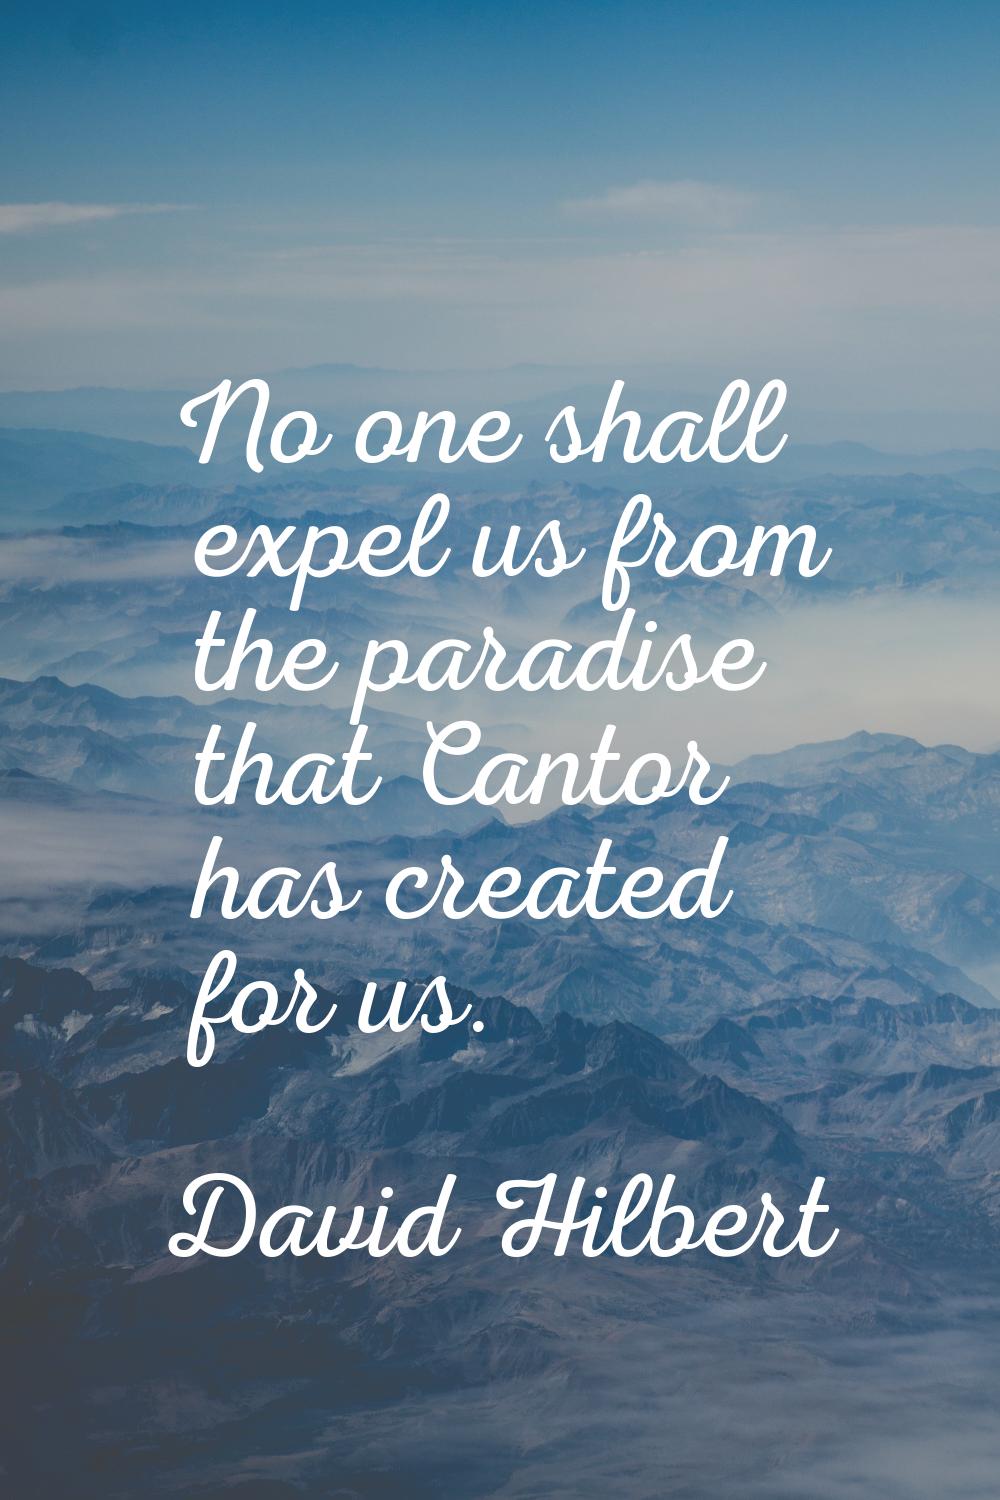 No one shall expel us from the paradise that Cantor has created for us.